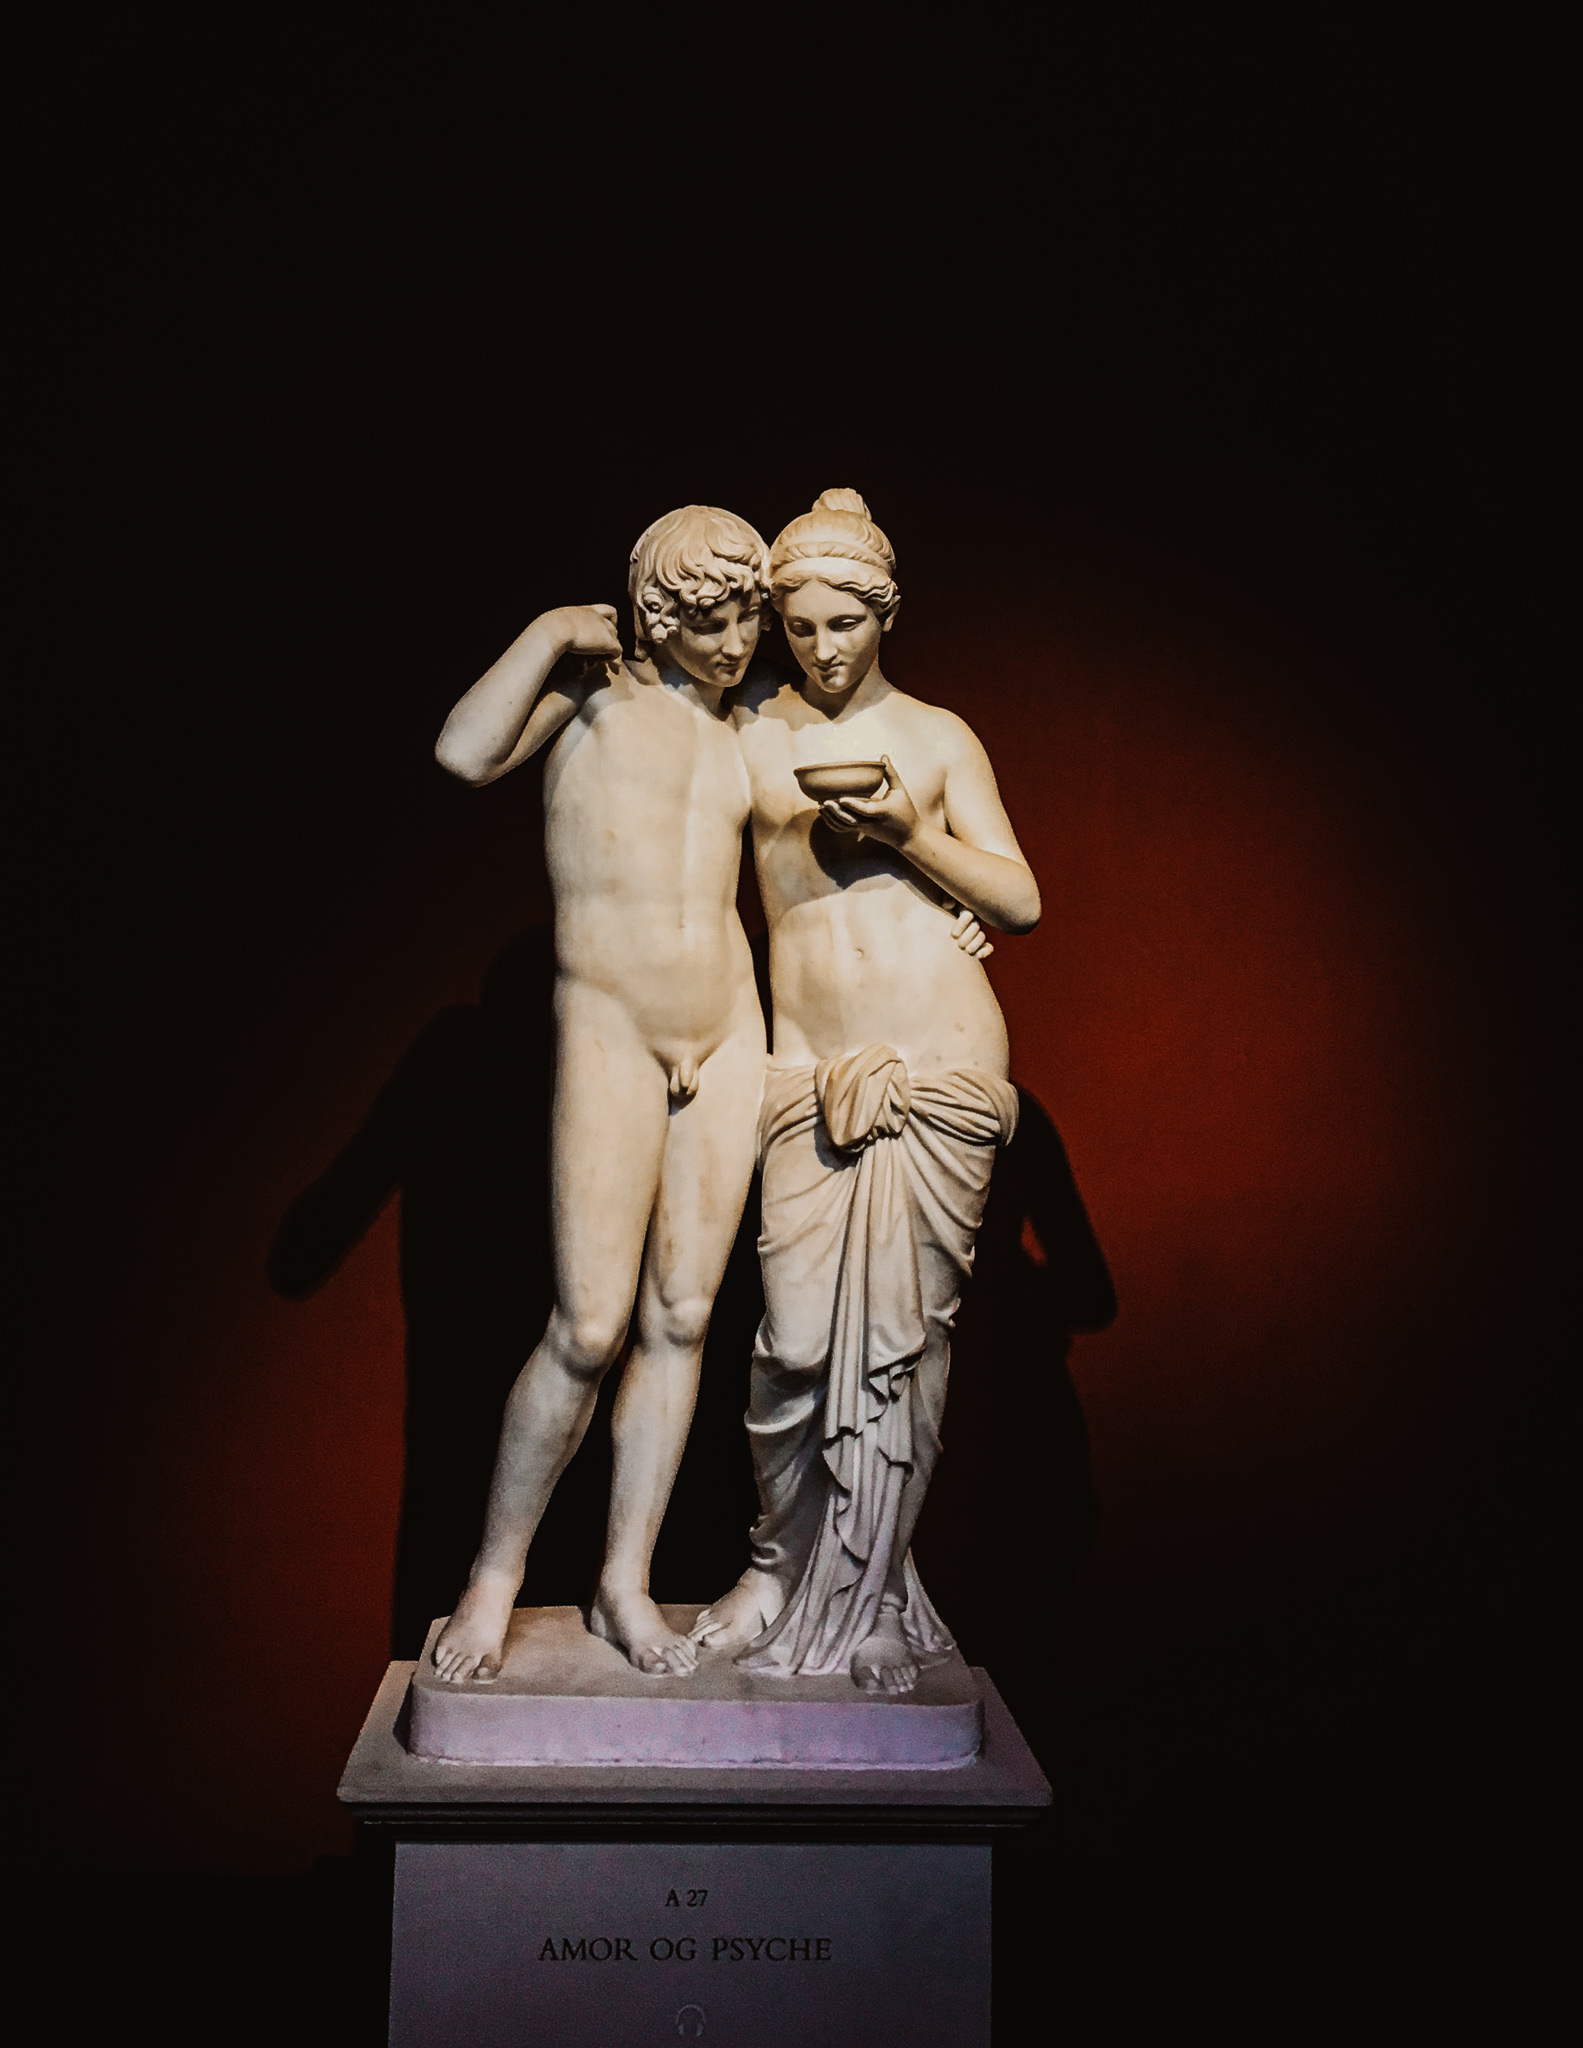 A marble statue of two human figures,1 man and 1 woman, in a dark room with one light source.